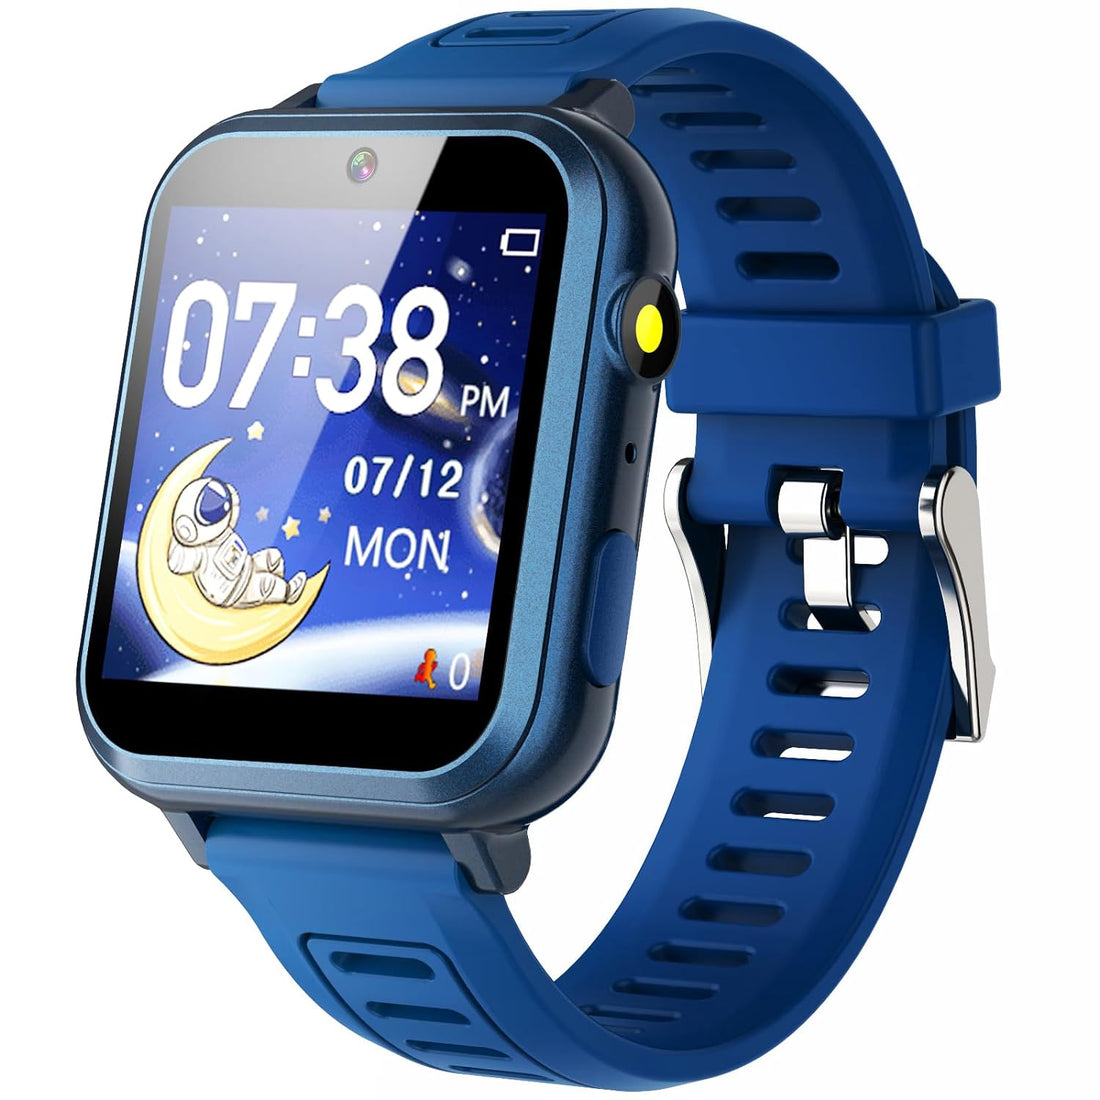 Waterproof Touch Screen Smart Watch with 24 Puzzle Games HD Camera Music Player Pedometer Alarm Clock and Selfie Cam - Great Learning Toy for Kids (Blue)